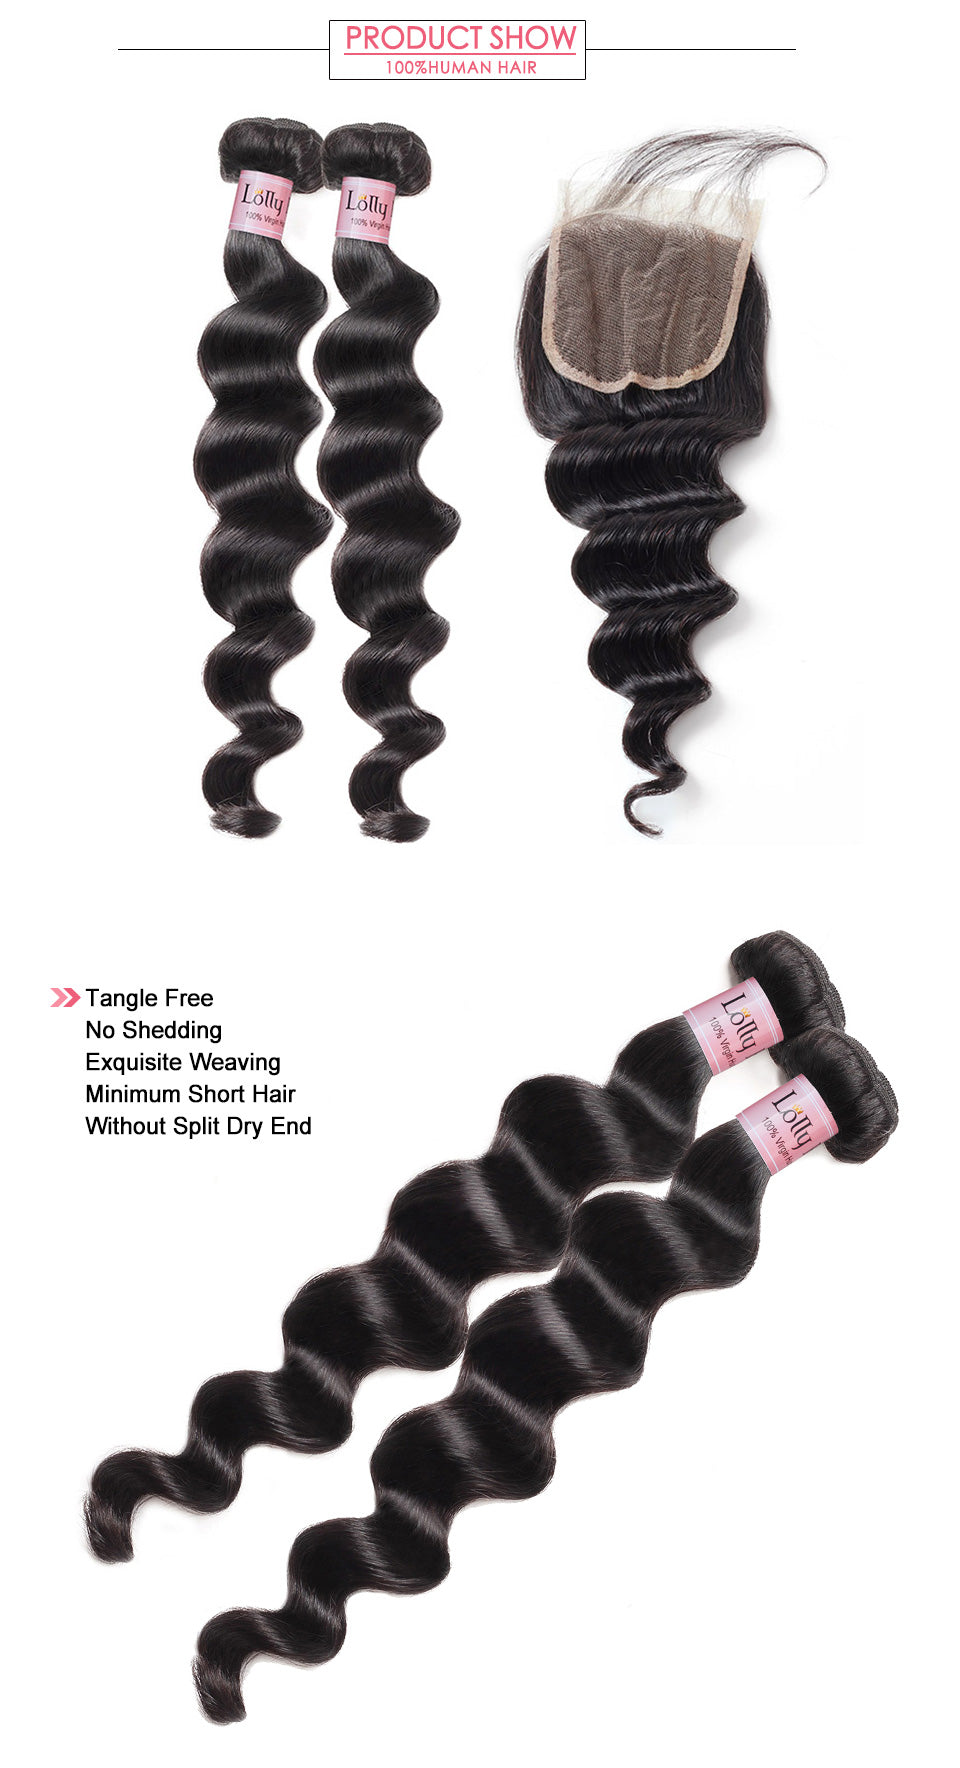 Grade 9A Brazilian Loose Deep Wave Hair 2 Bundles with 4x4 Lace Closure Lolly Hair